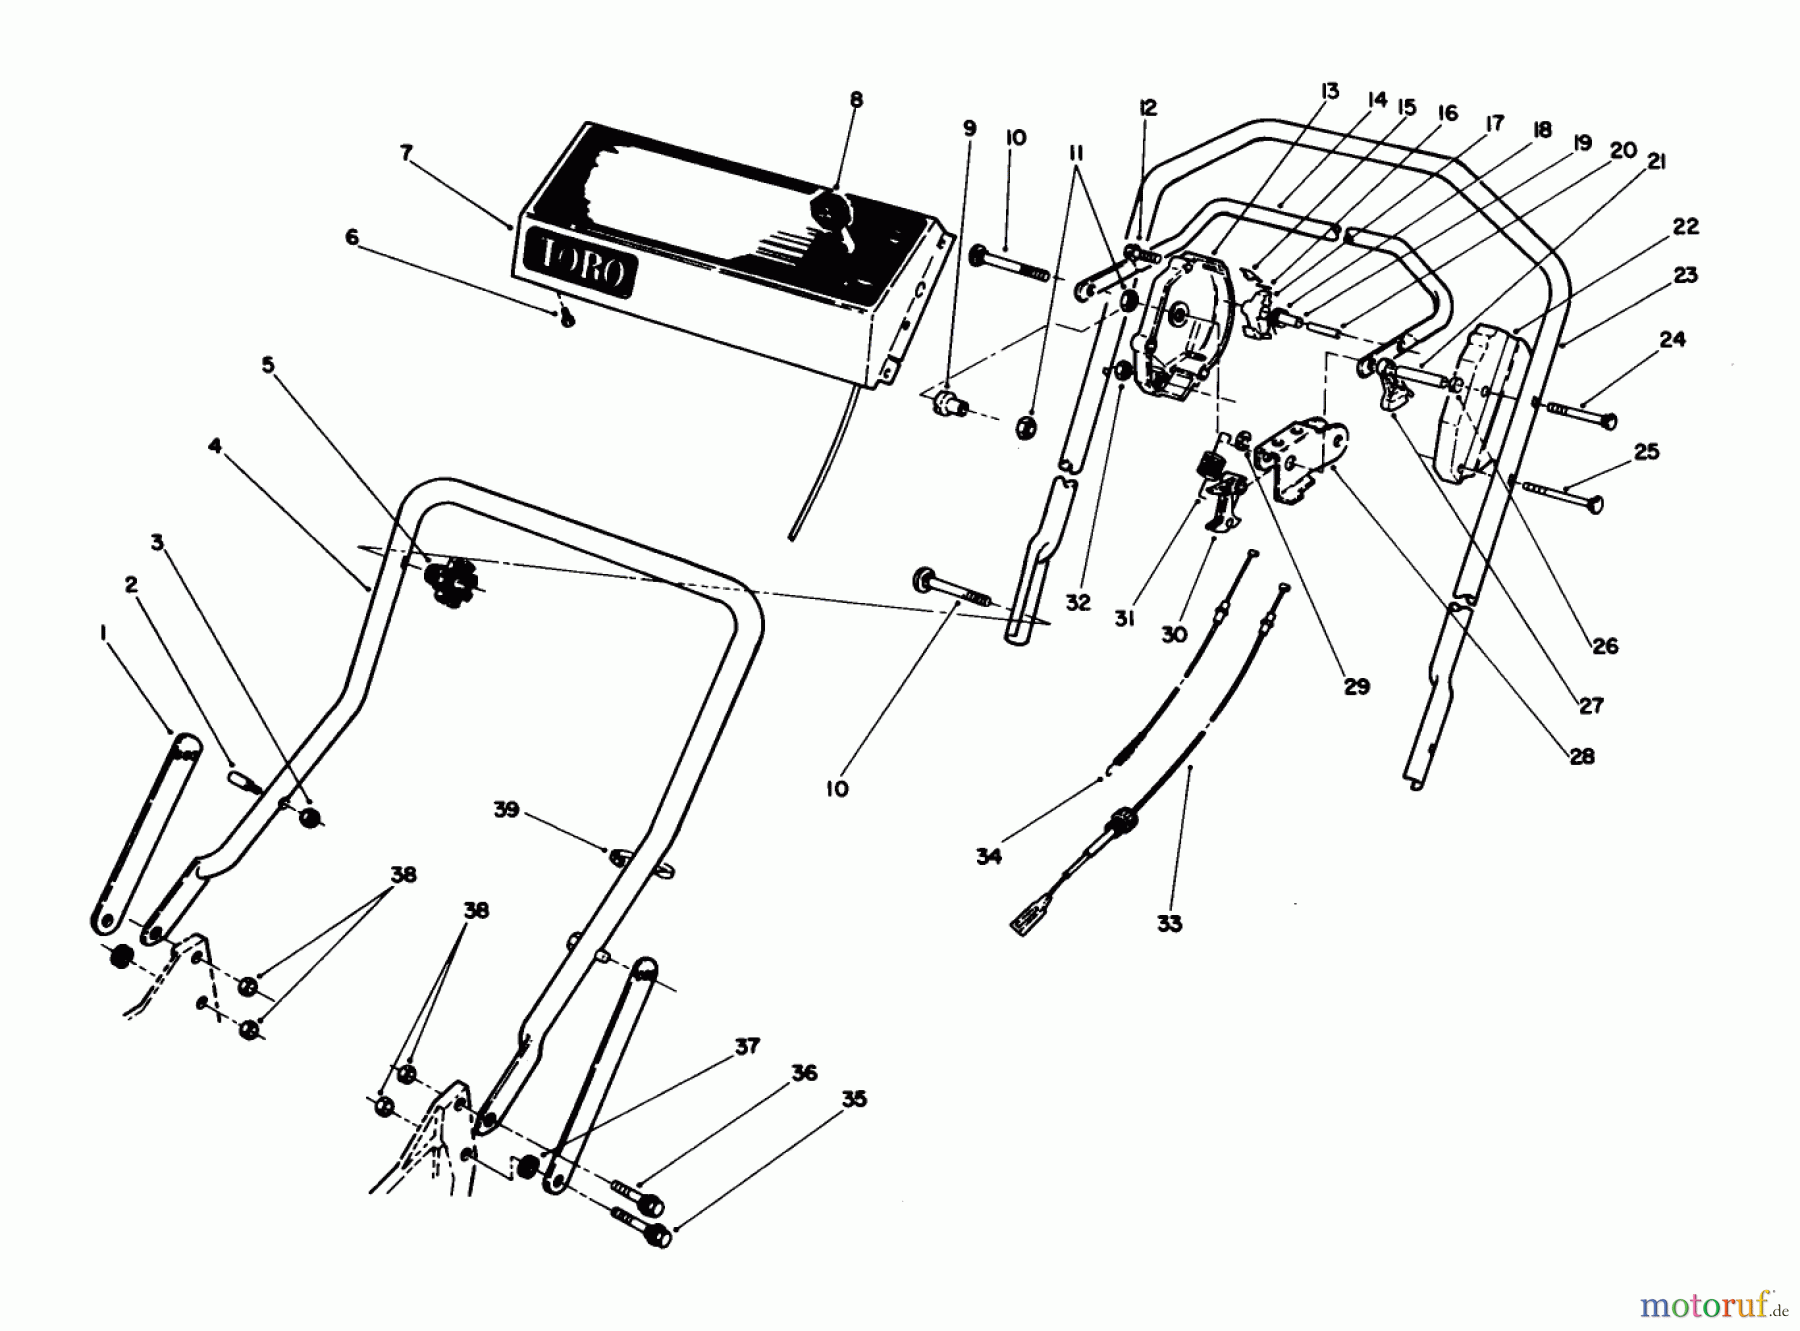  Toro Neu Mowers, Walk-Behind Seite 1 20532 - Toro Lawnmower, 1989 (9000001-9999999) HANDLE AND TRACTION CONTROL ASSEMBLY